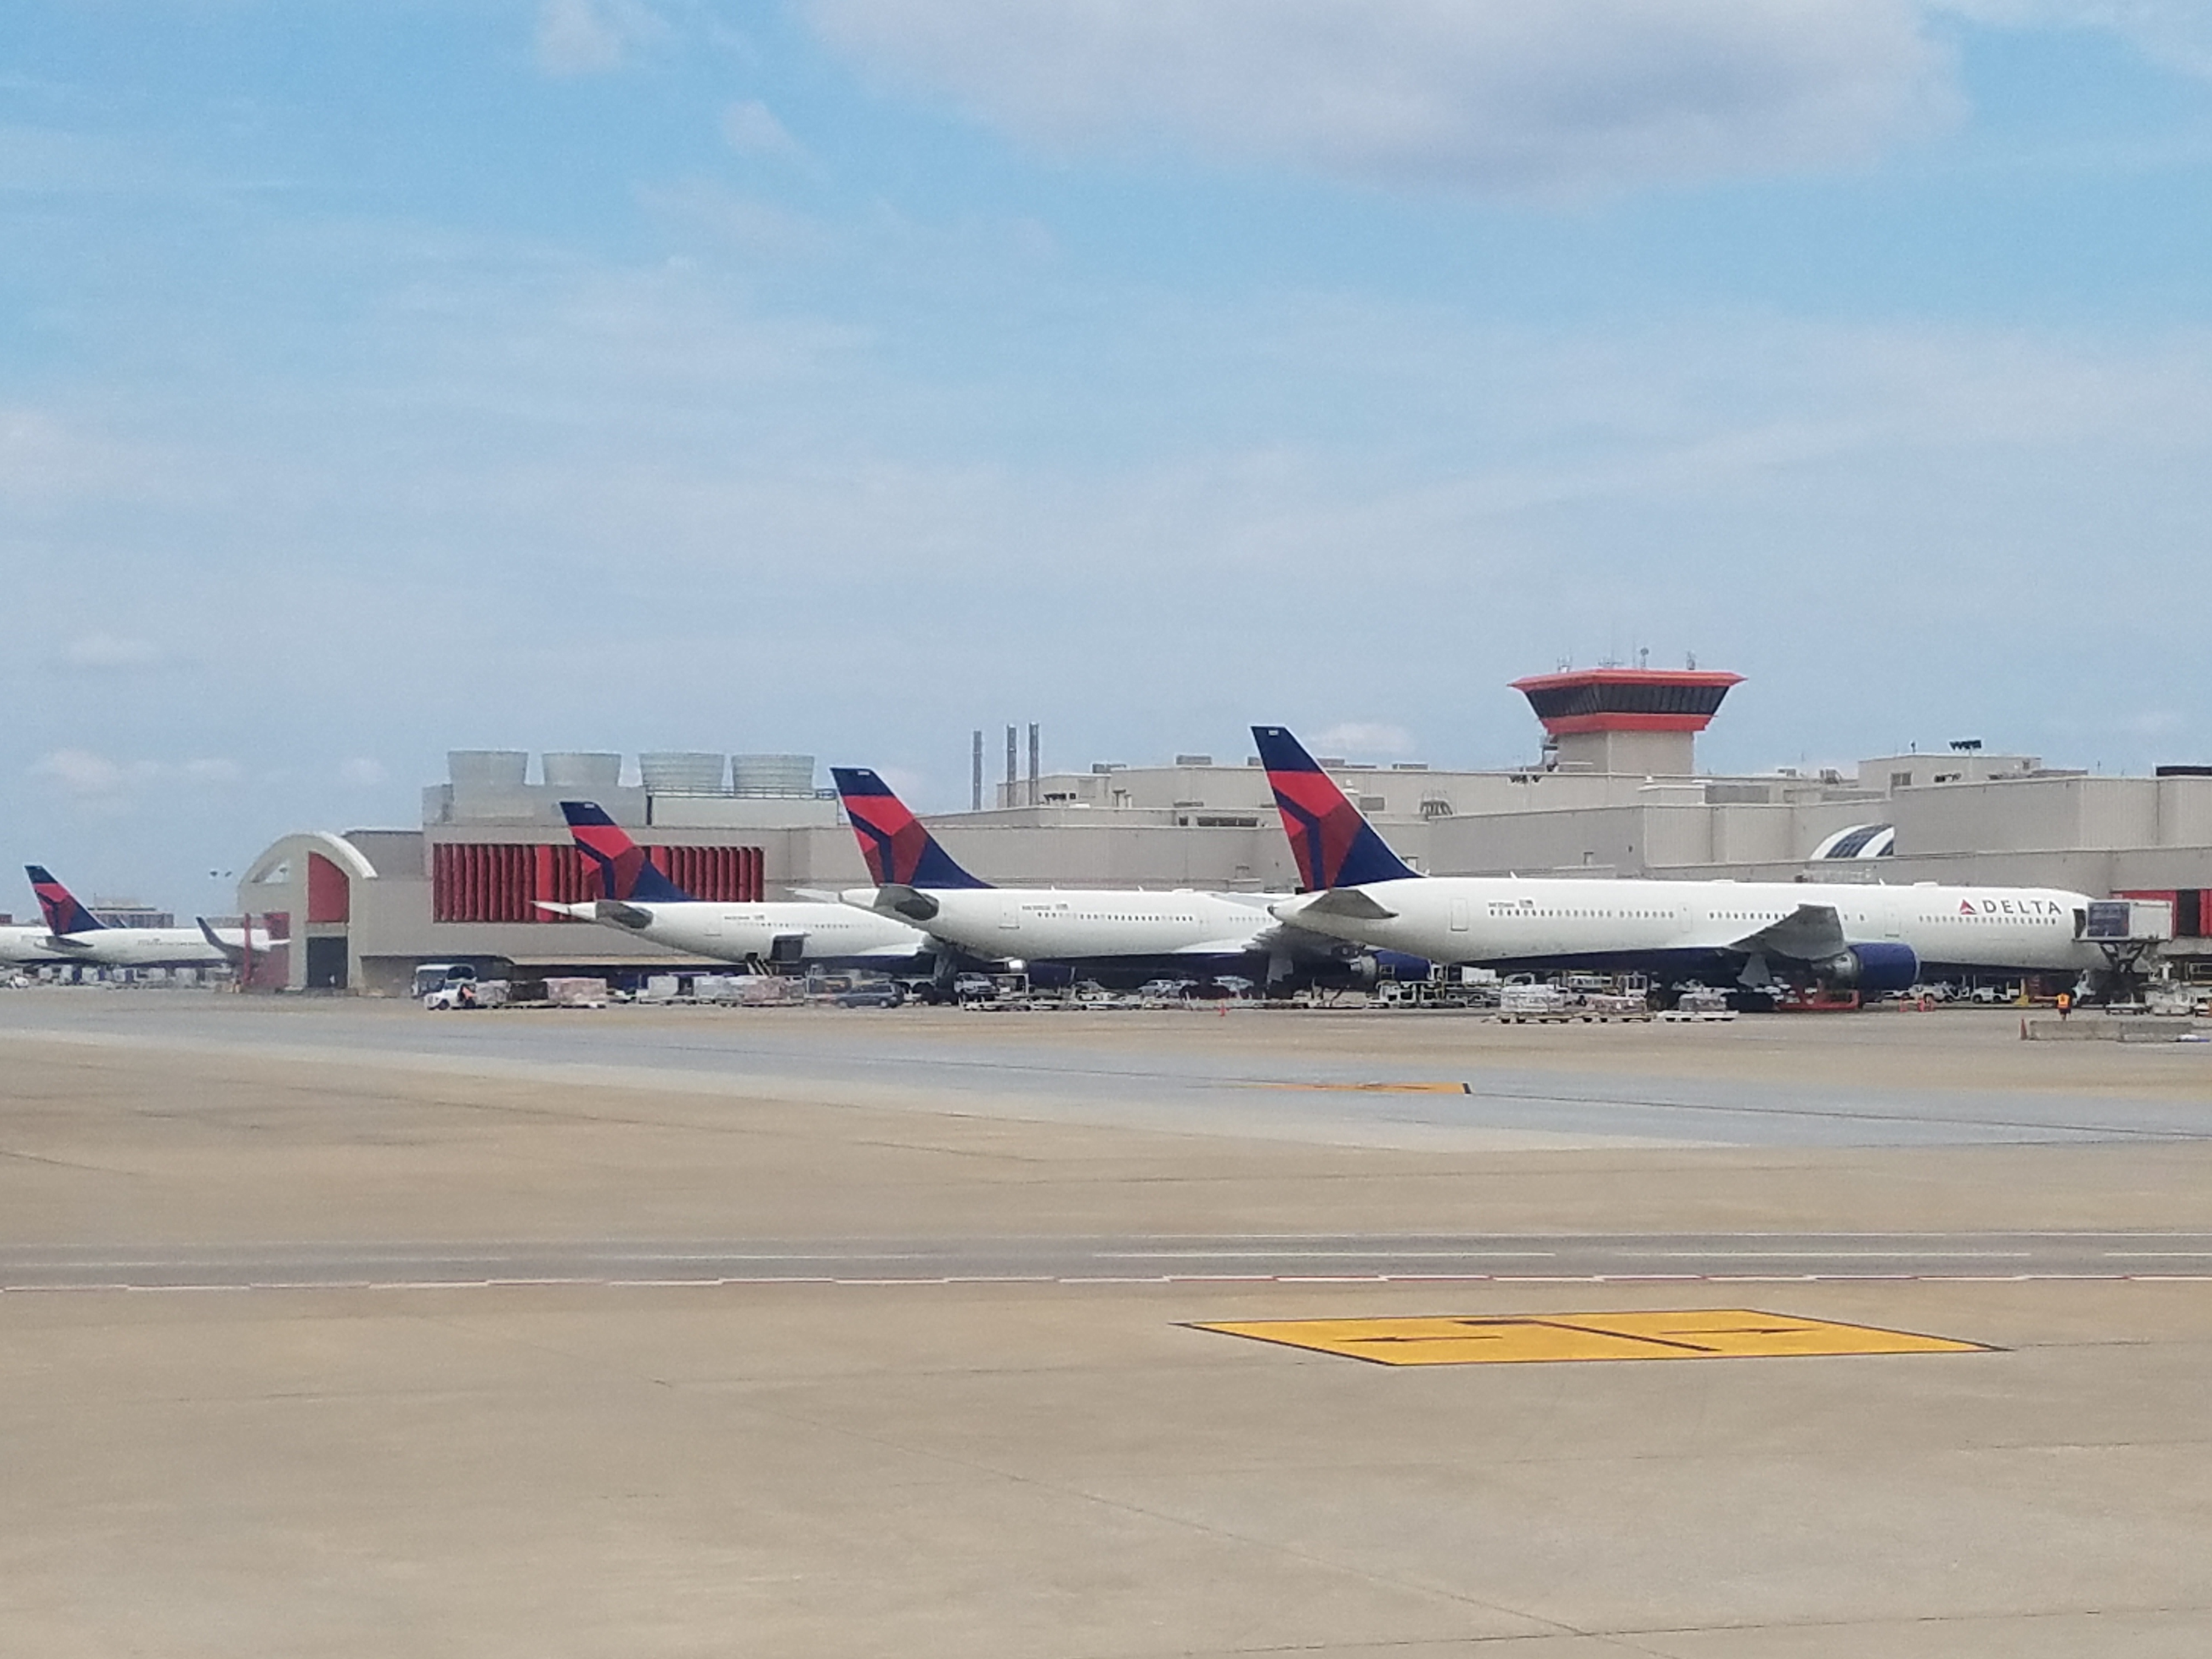 SkyMiles Stagnation: Delta’s Loyalty Program Hits A Ceiling As Competitors Climb